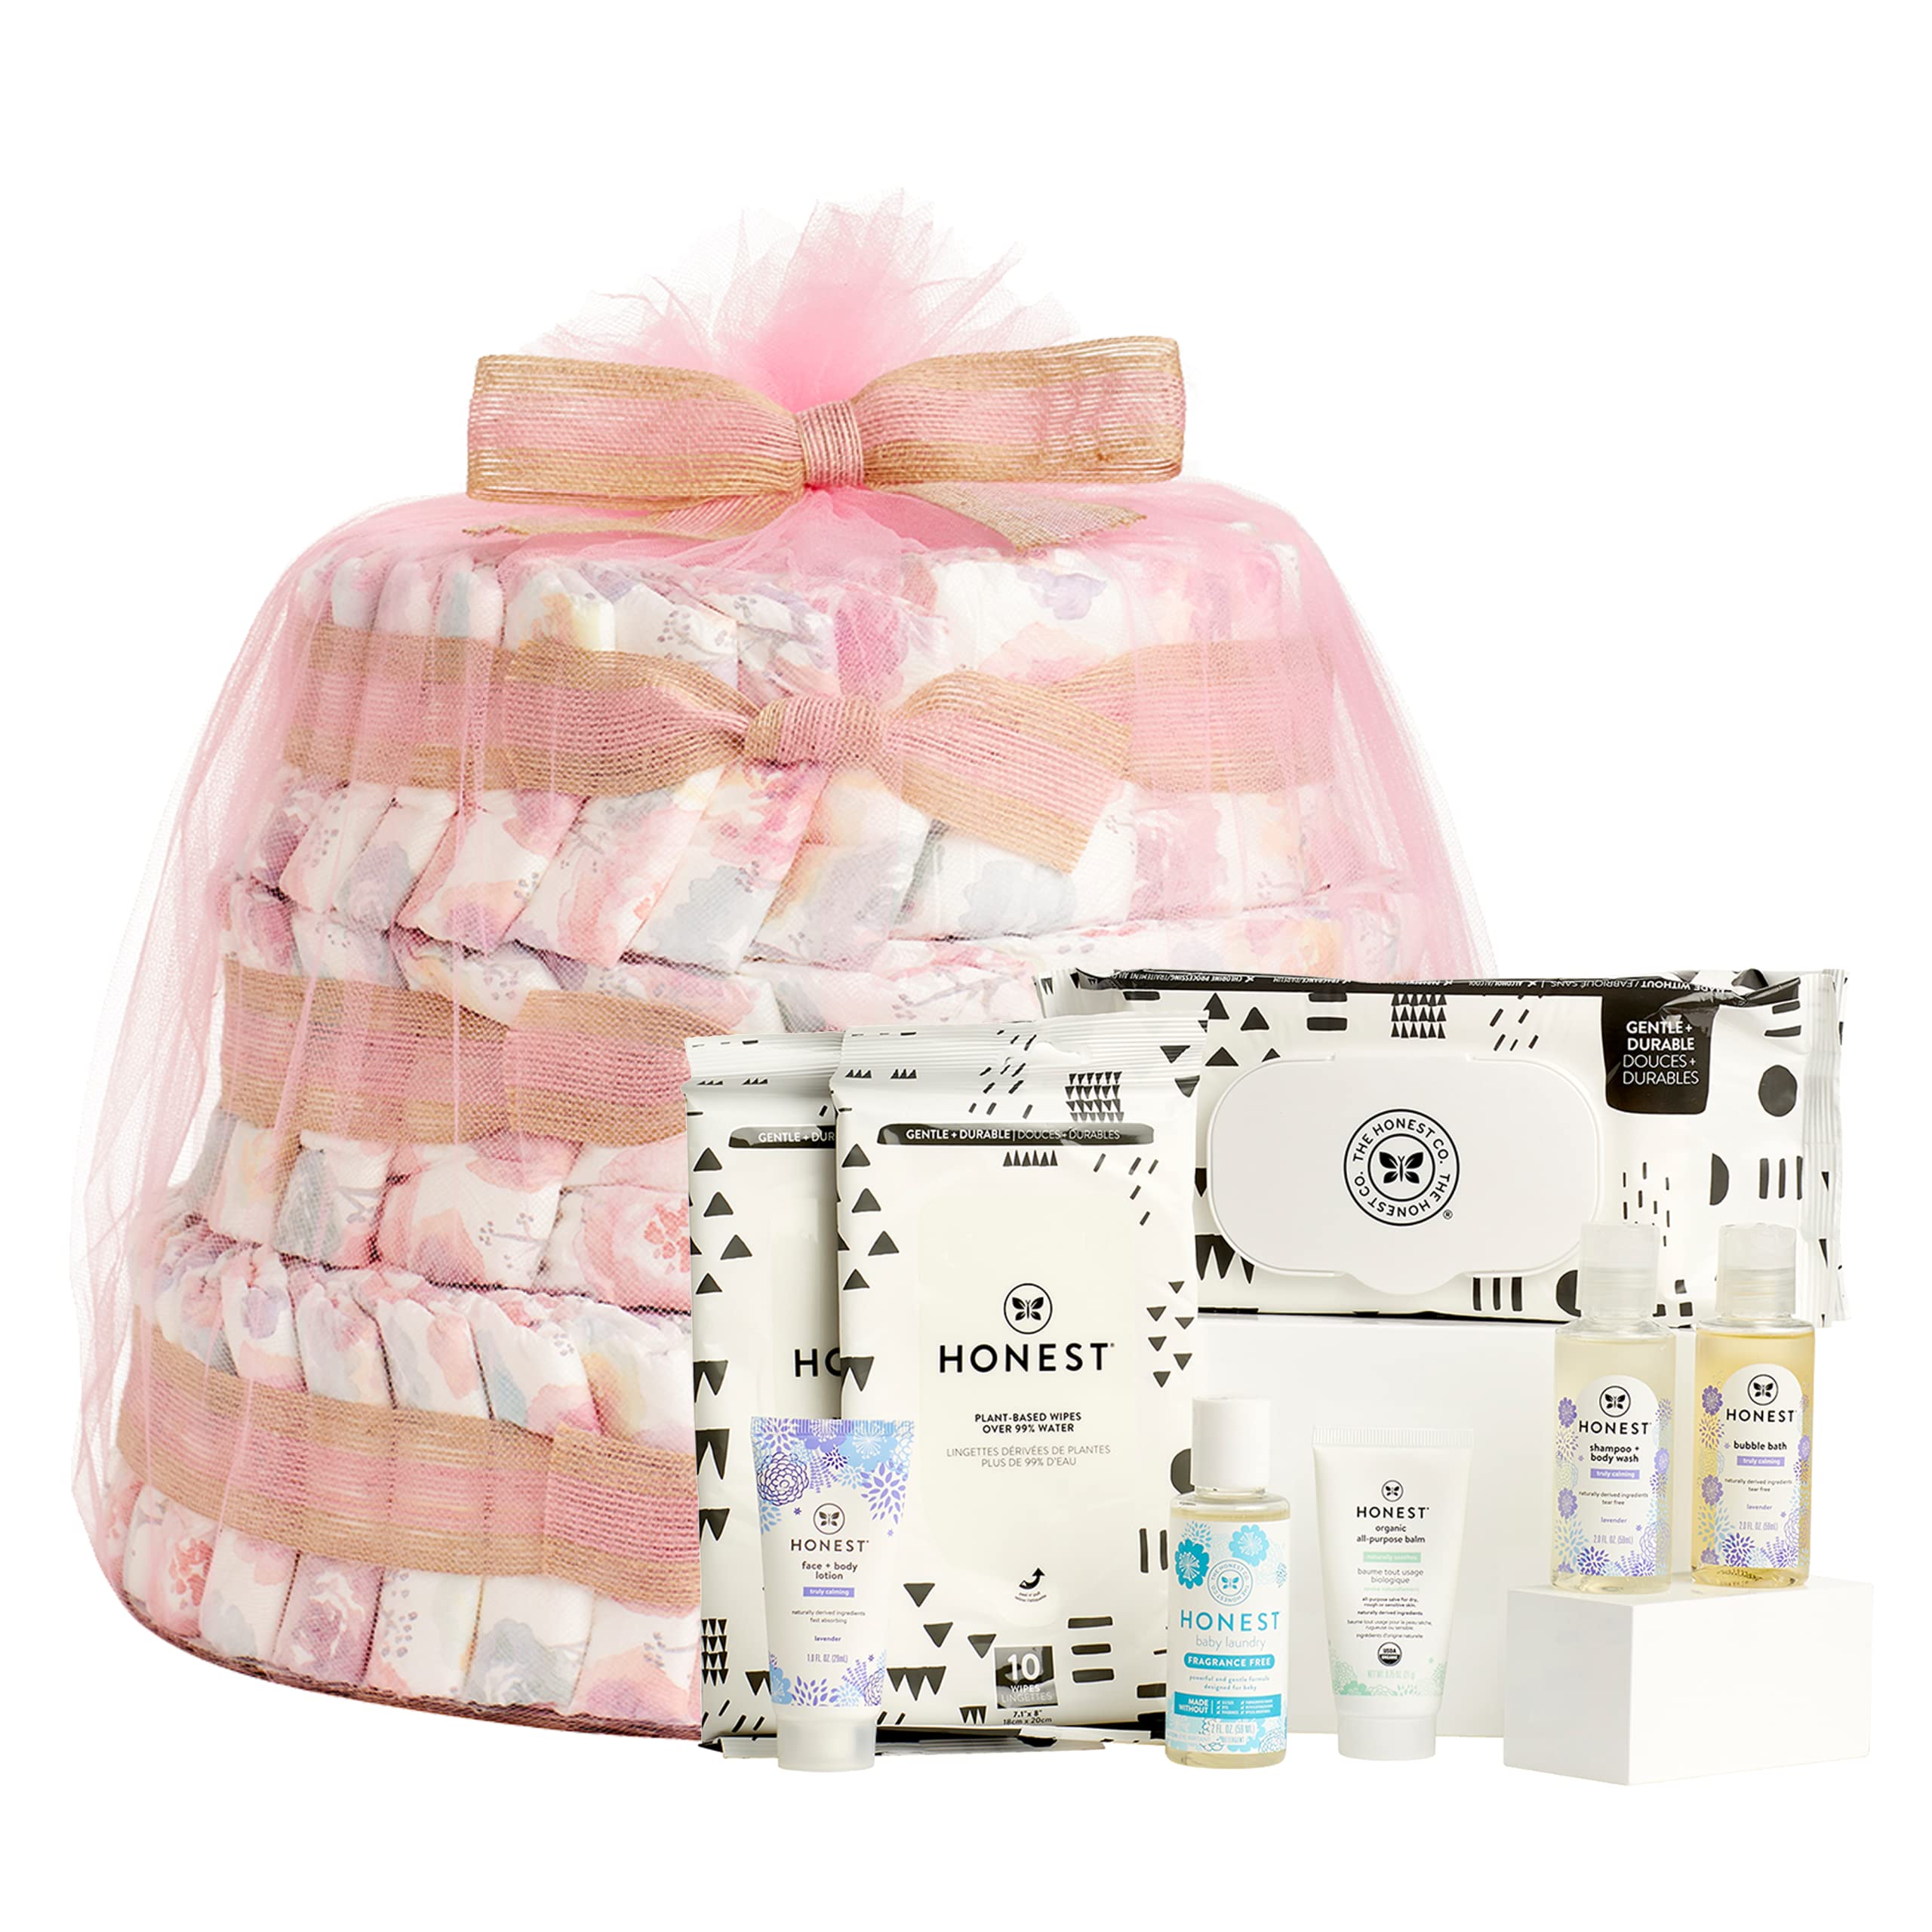 The Honest Company Deluxe Diaper Cake | Clean Conscious Diapers, Baby Personal Care, Plant-Based Wipes | Rose Blossom | Deluxe, Size 1 (8-14 lbs), 70 Count